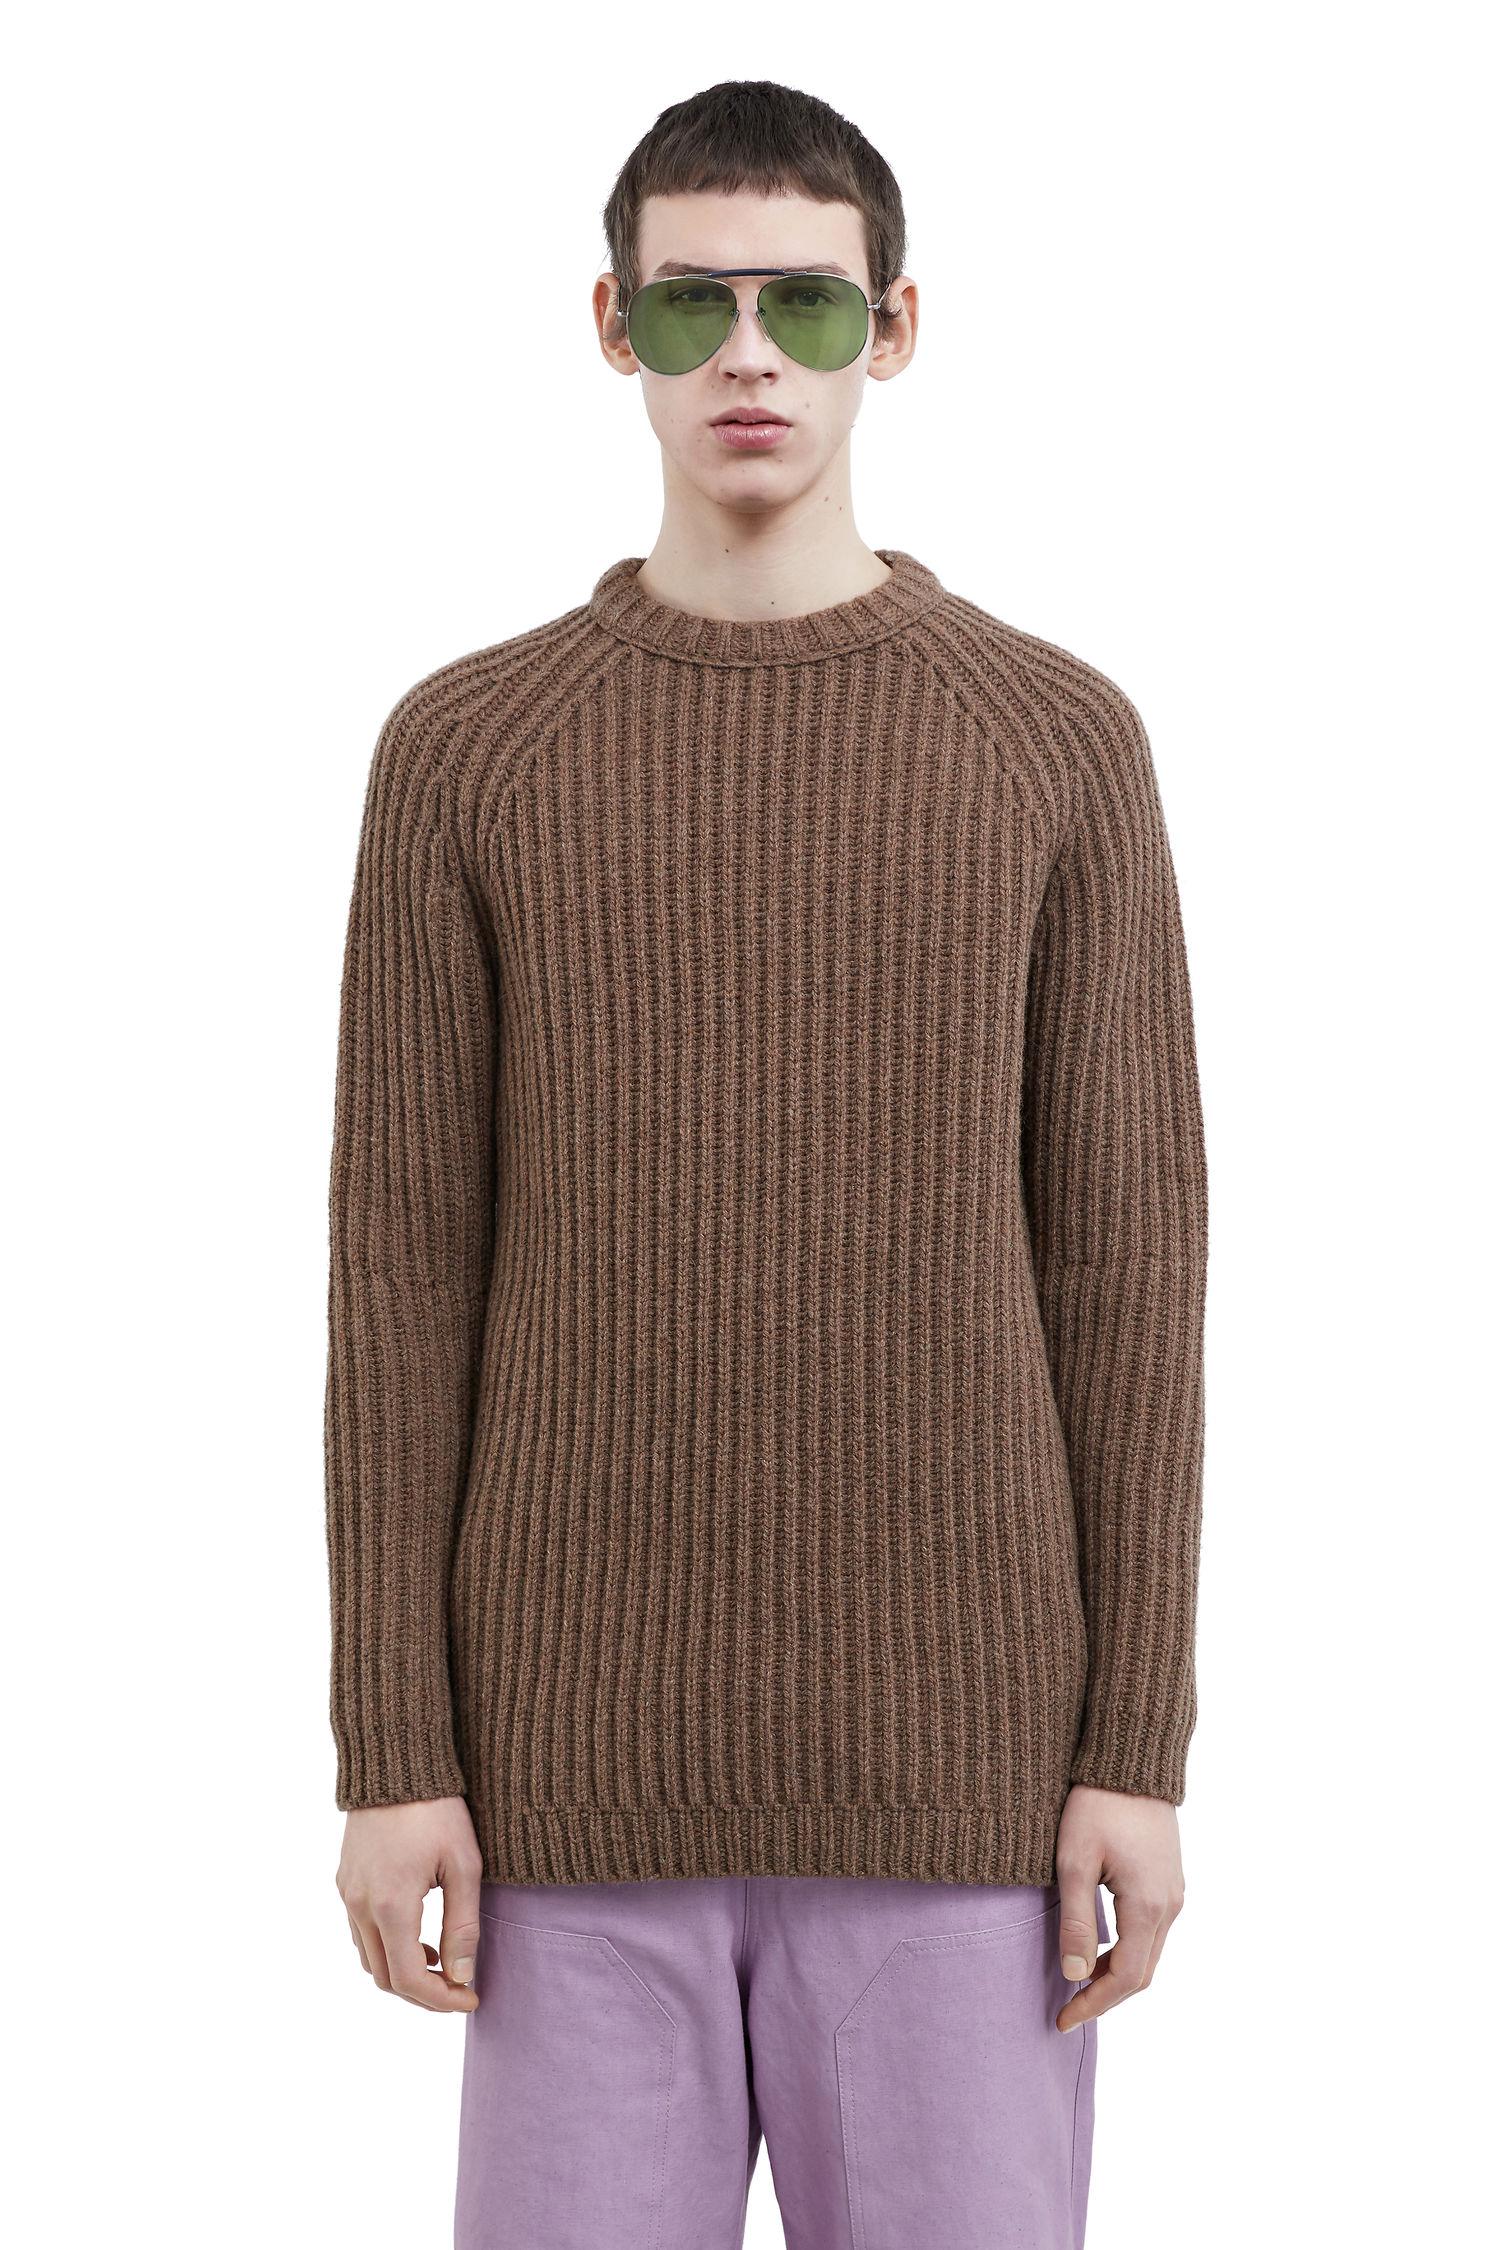 Acne Studios Kas Crew-neck Ribbed Sweater in Blue for Men - Lyst